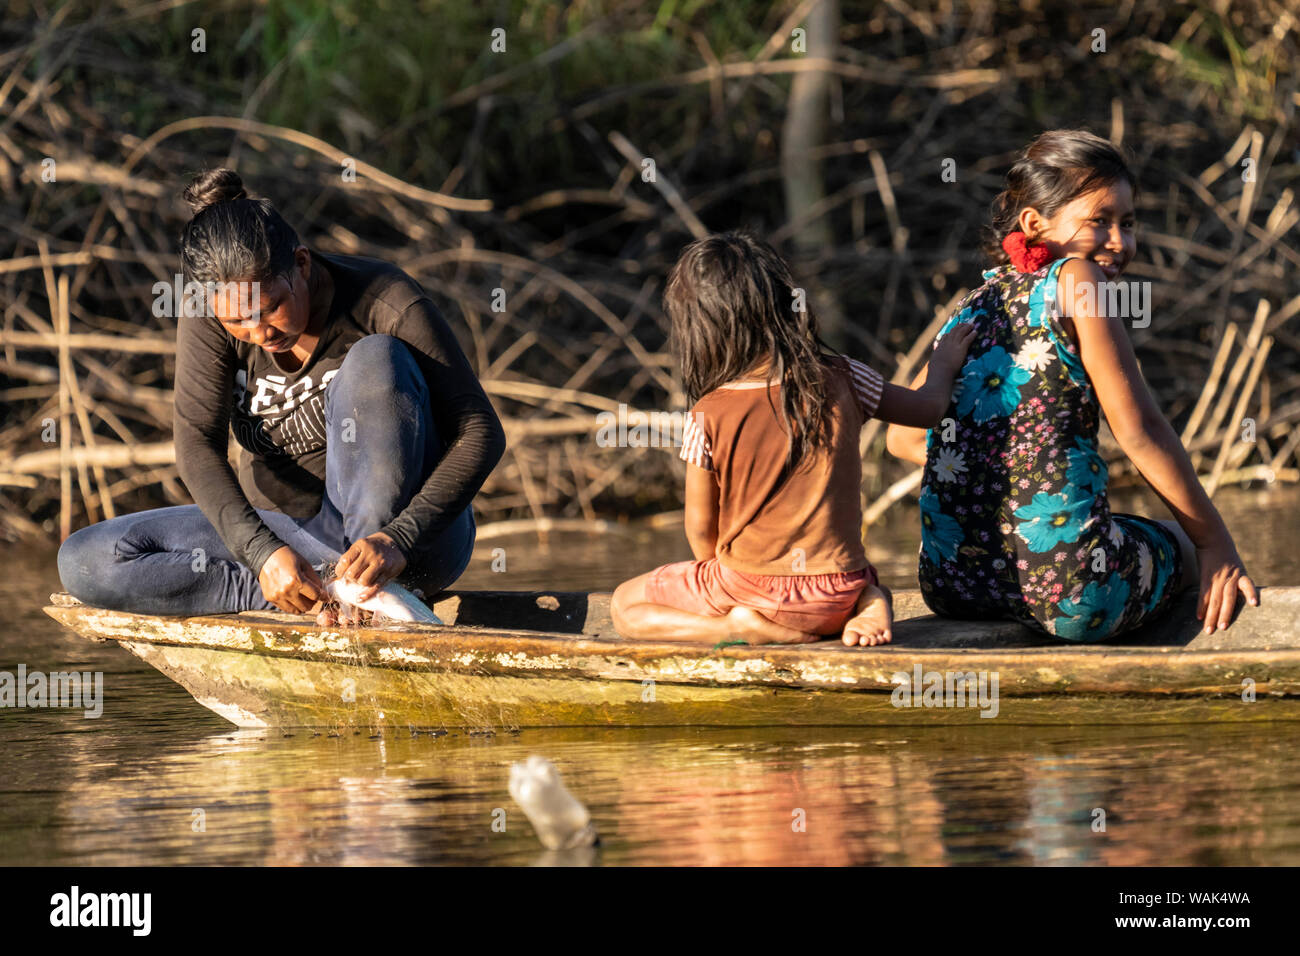 Pacaya Samiria Reserve, Peru. Woman with her two daughters in a dugout canoe, removing a fish from a net. (Editorial Use Only) Stock Photo